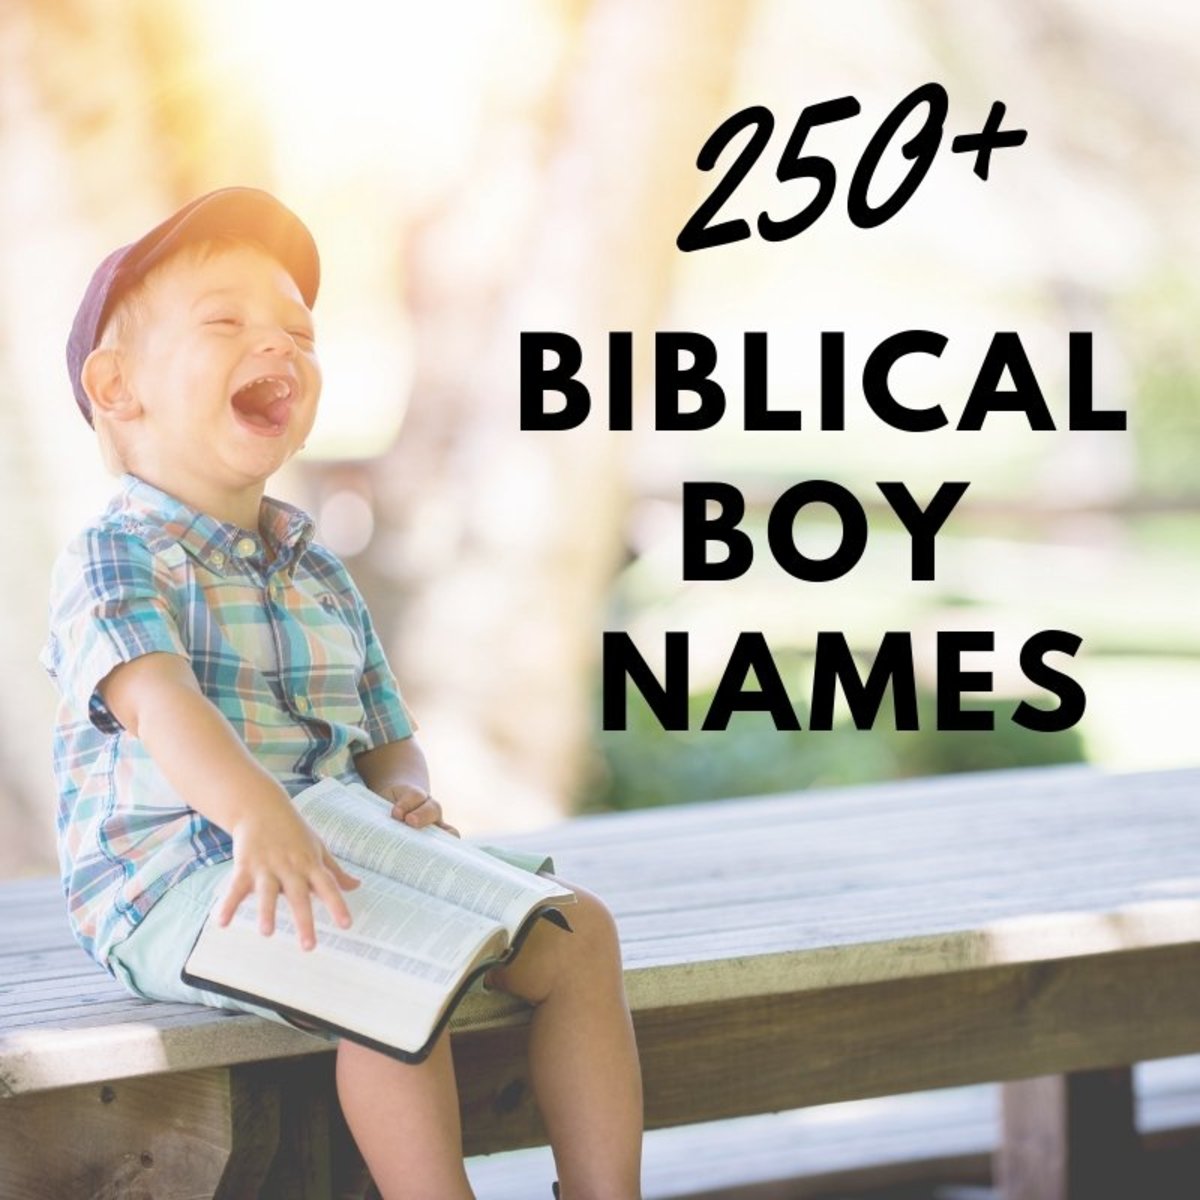 250+ Biblical Boy Names With Meanings | WeHaveKids